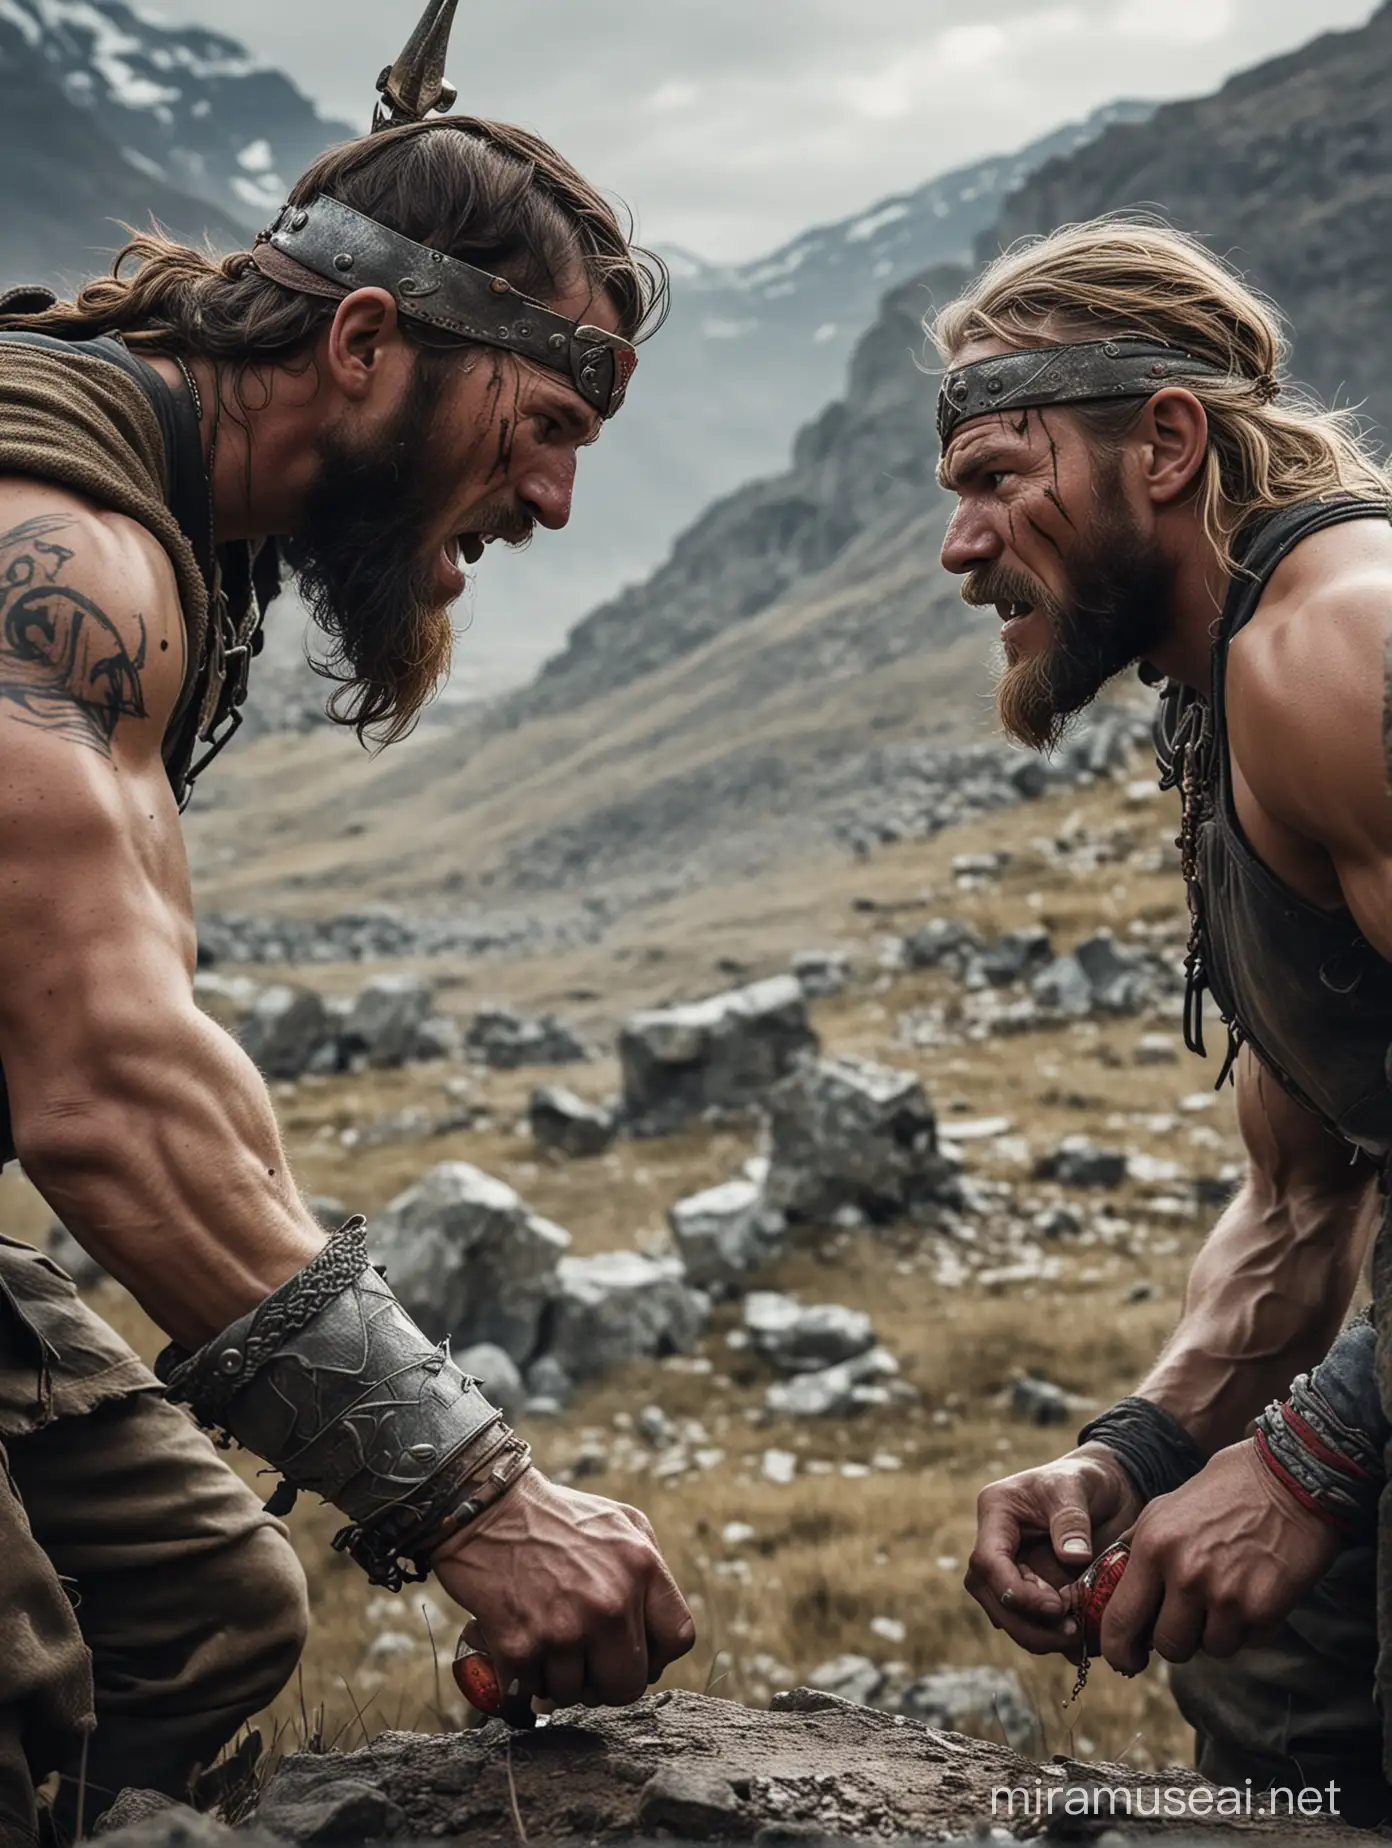 In the midst of rugged mountains, two fierce Vikings engage in a battle of strength and willpower. Each is determined to claim the coveted prize: a single bottle of Red-Bull energy drink, their elixir of energy and vigor. With muscles tense and weapons drawn, they clash amidst the harsh terrain, their roars echoing through the valleys. Theirs is a primal struggle, fueled not just by the desire for refreshment, but by the relentless drive to emerge victorious in this epic contest of endurance, apperance of his hands and face texture should be realistic with cinematic backgrounds.